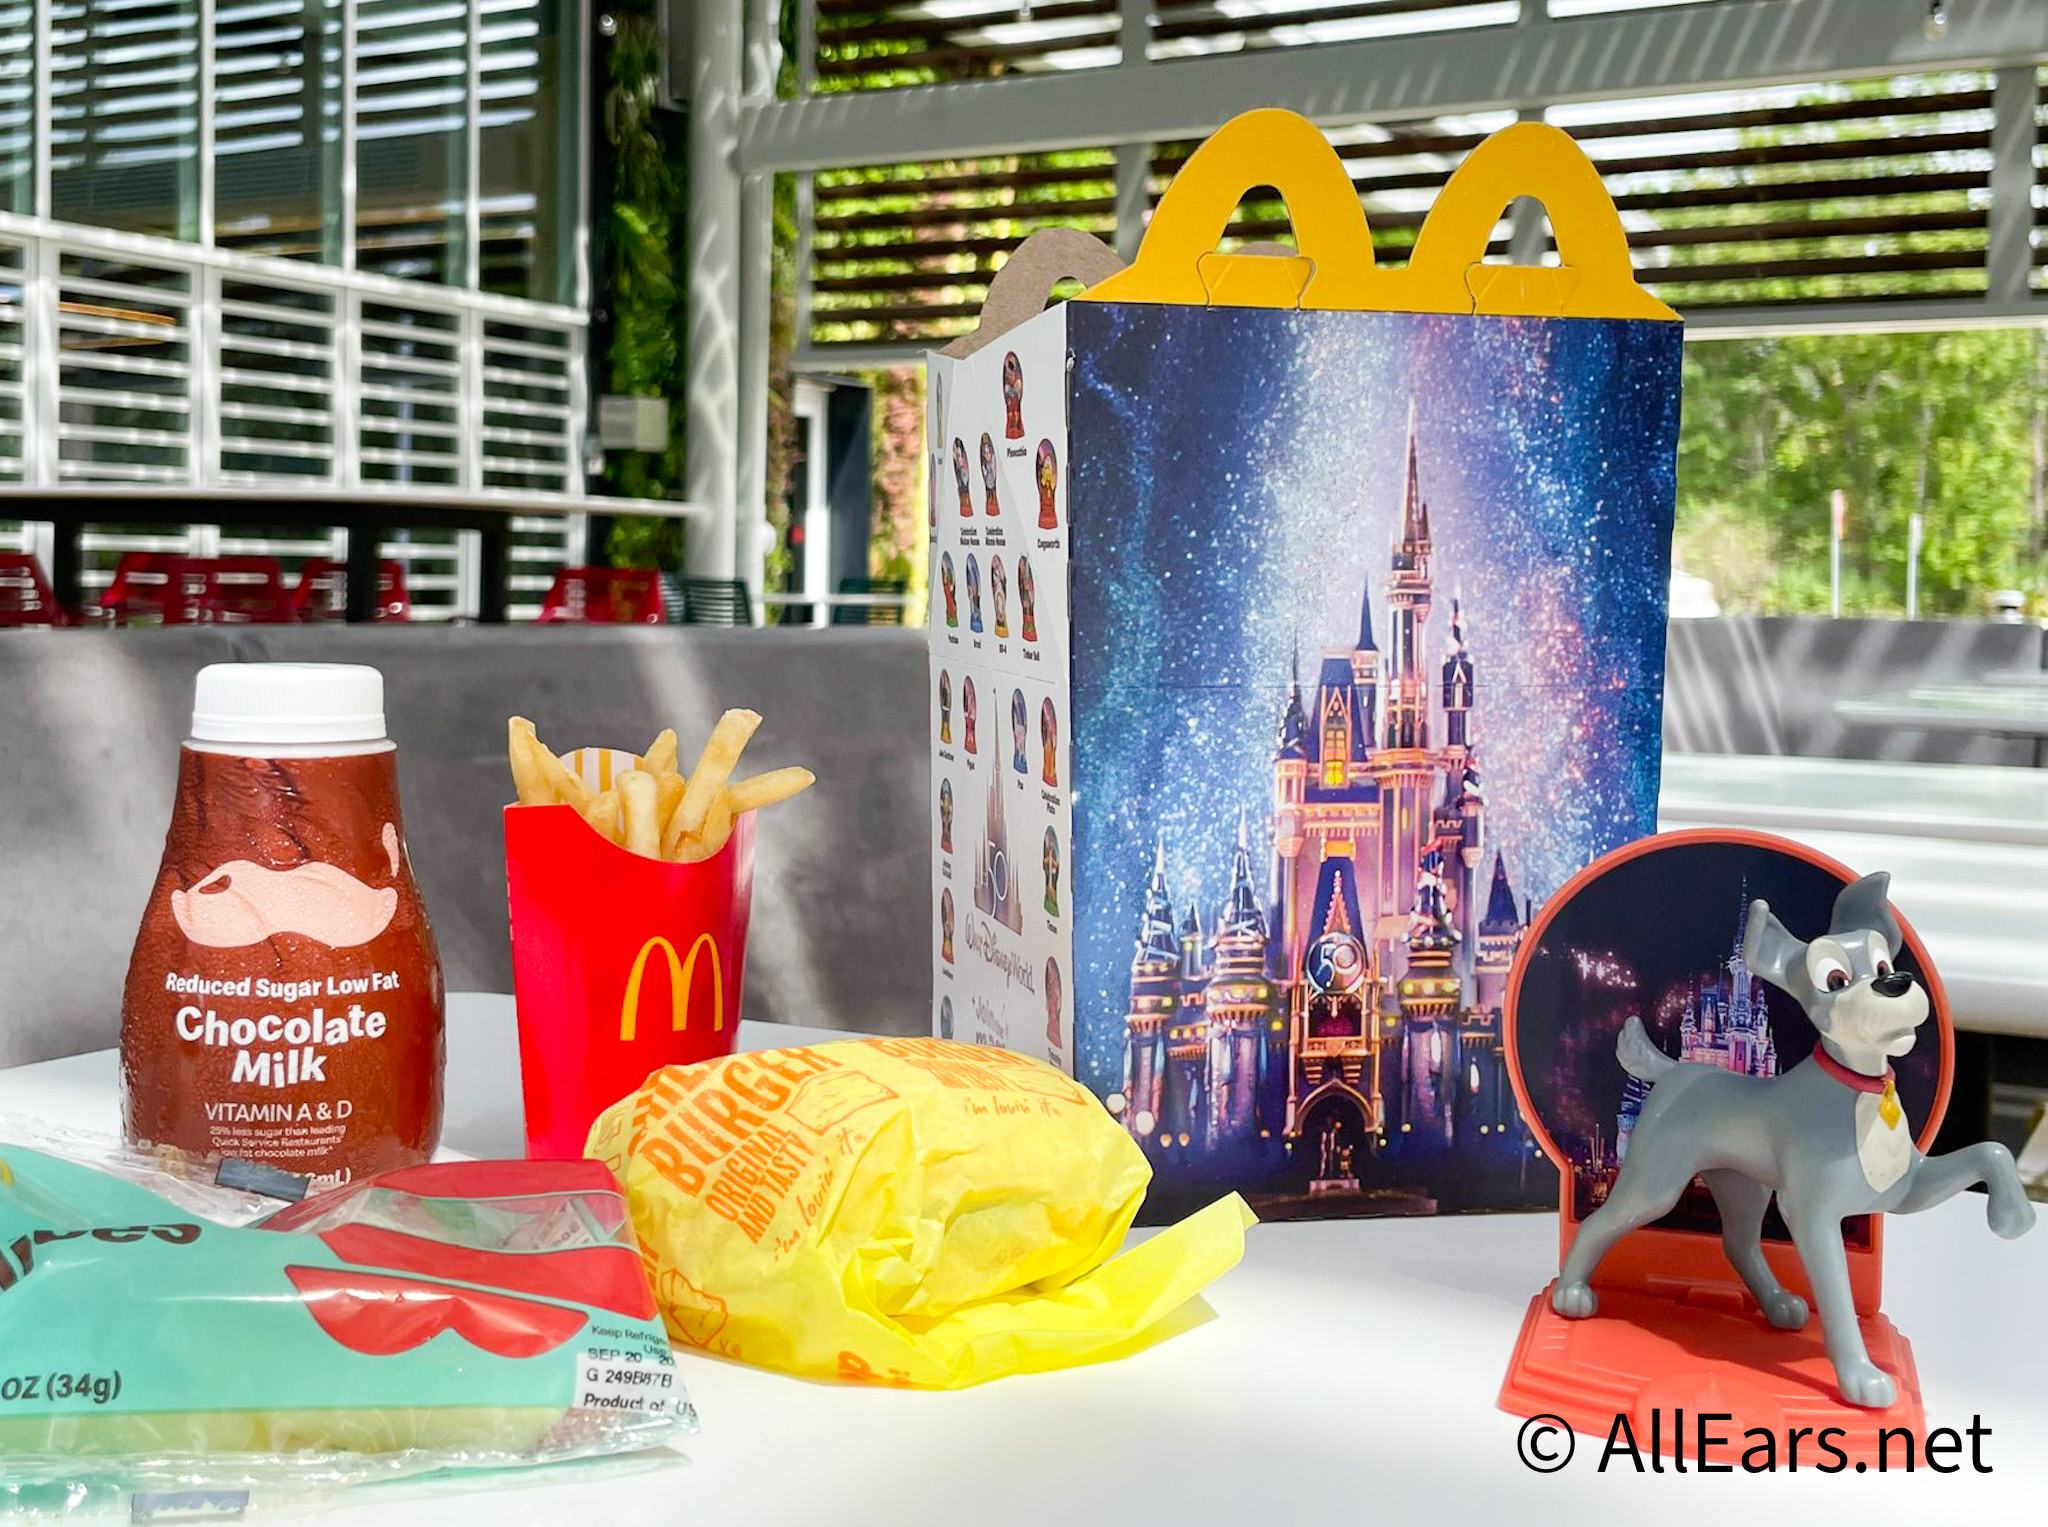 PHOTOS: Stitch Happy Meal Toys Are Now at McDonald's! - AllEars.Net